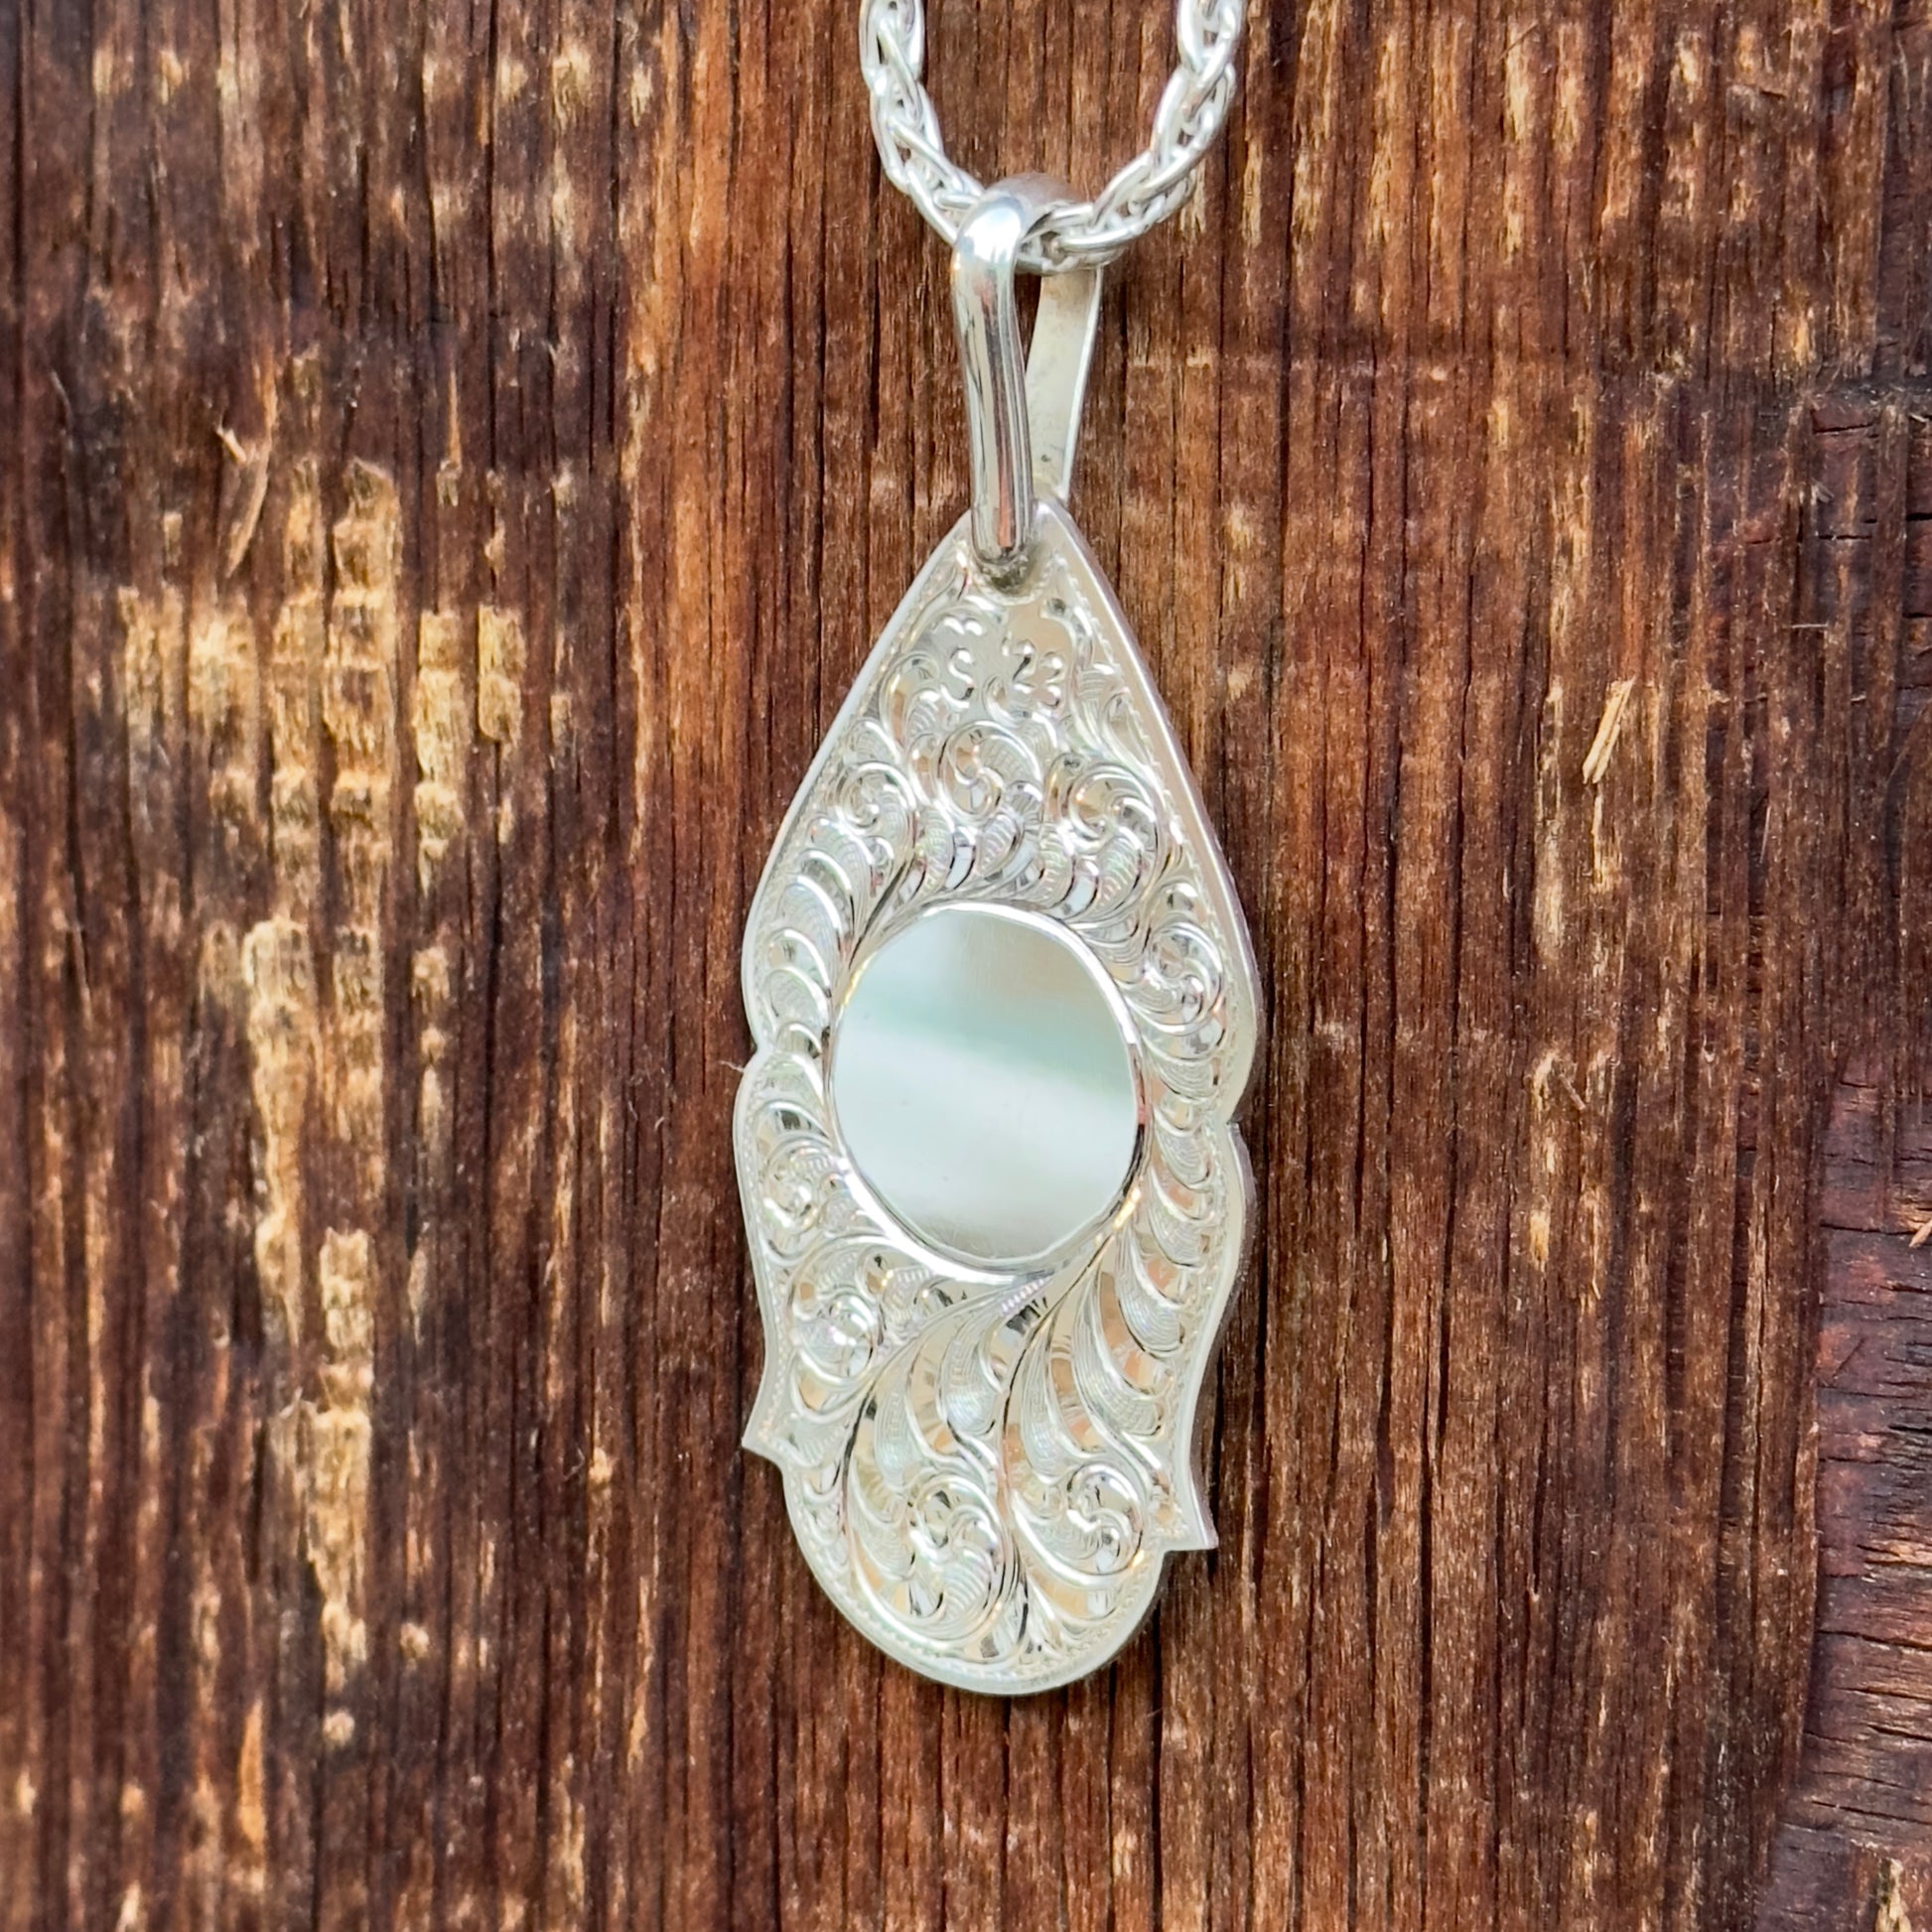 pendant with place to engrave brand or initials